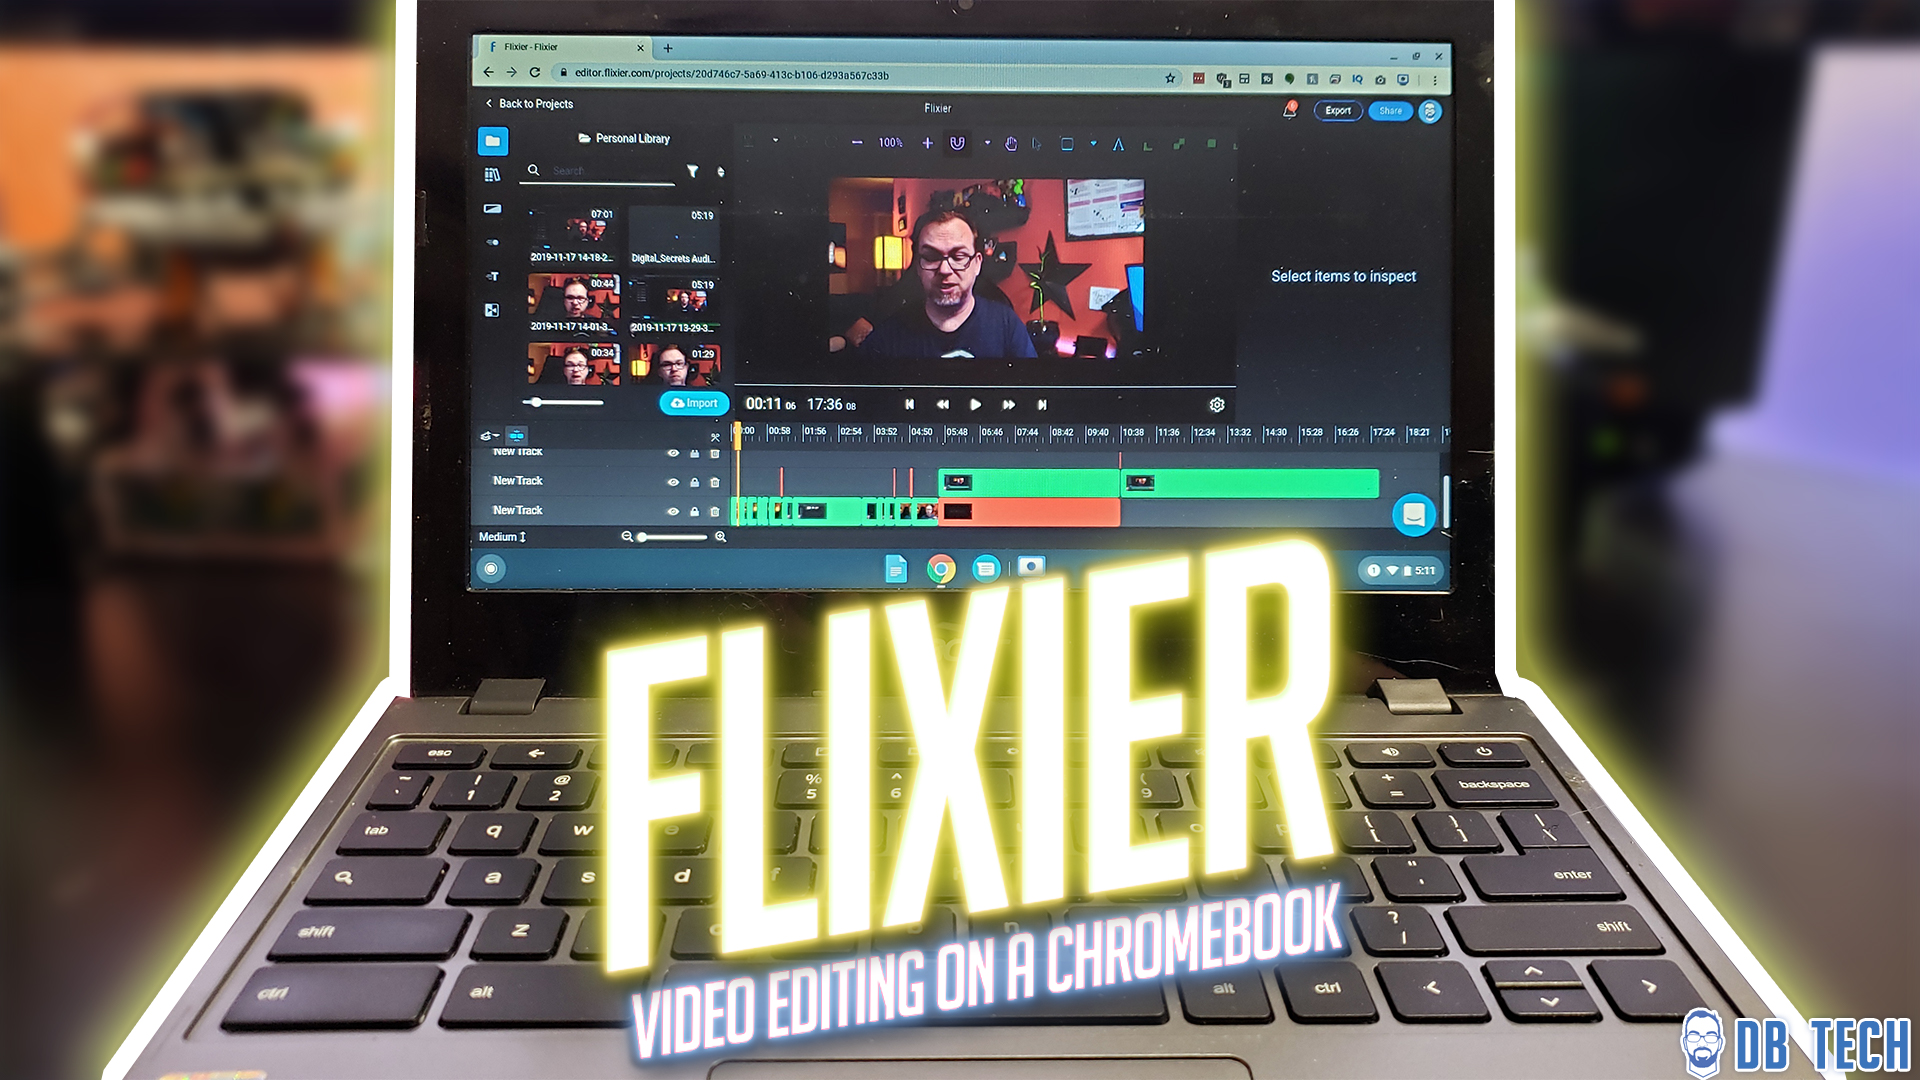 Flixier - High-Powered Video Editing on a Chromebook